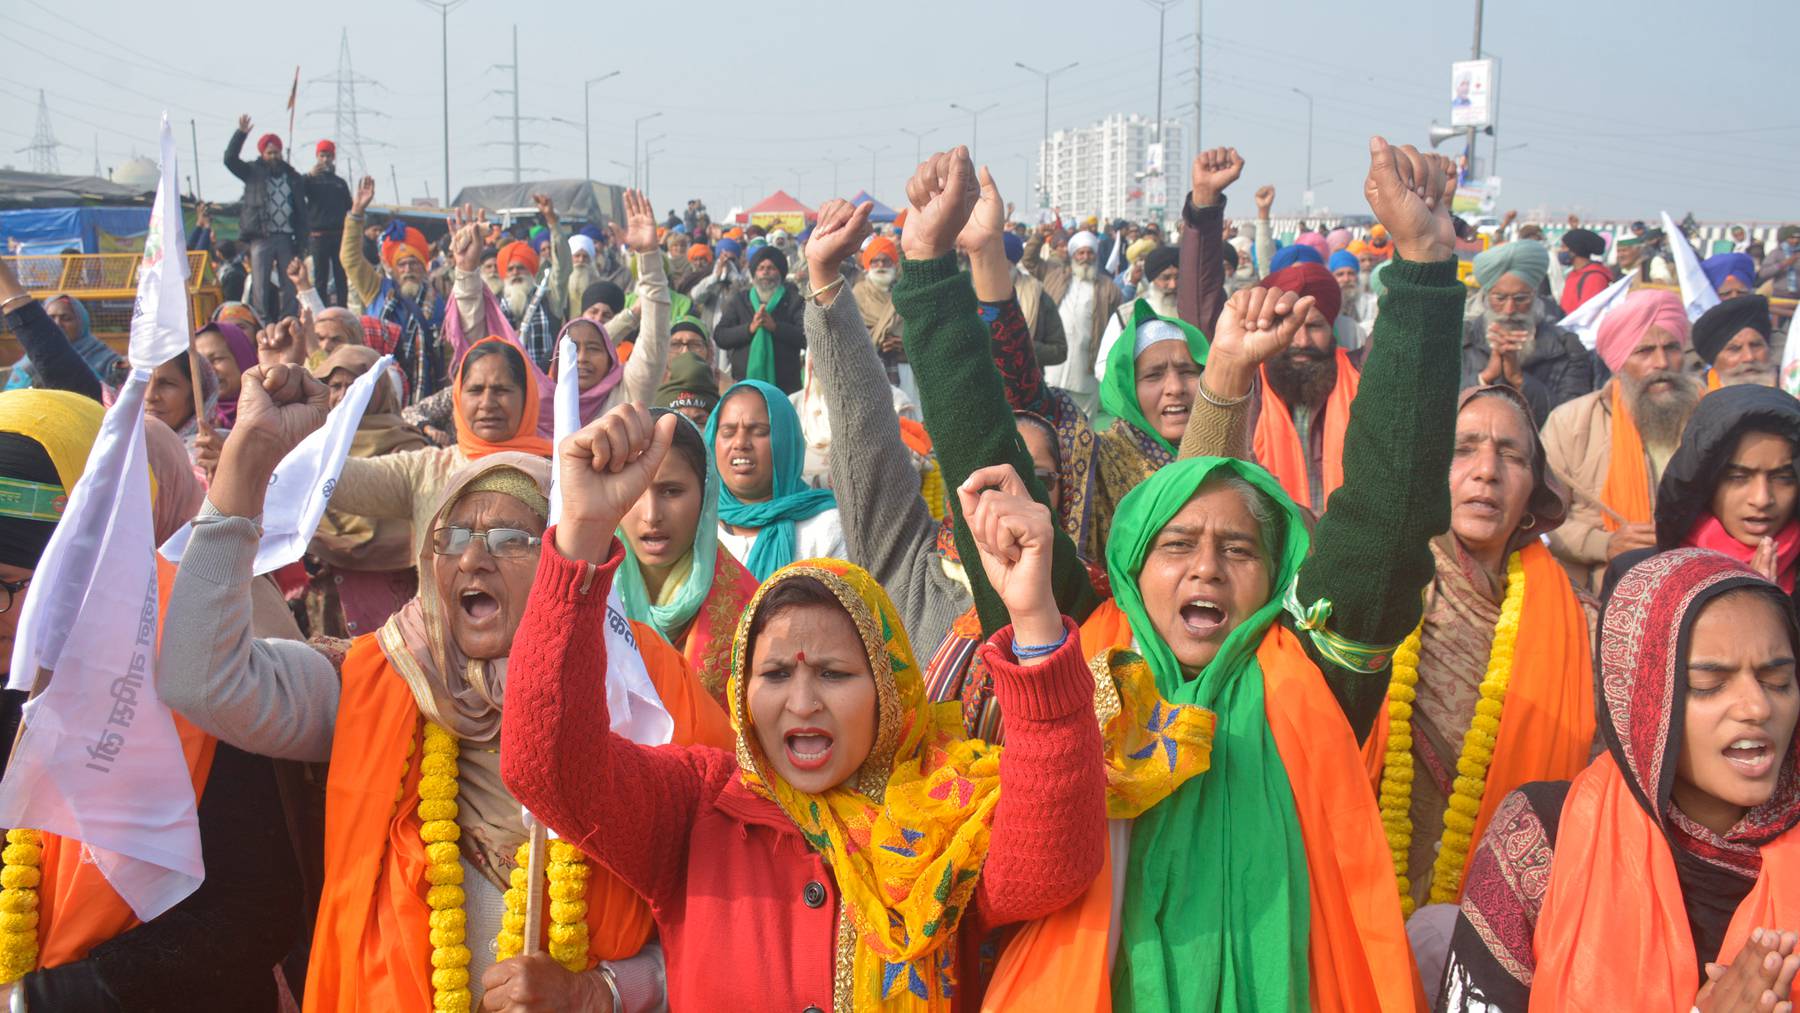 Farmers raise slogans during the ongoing protest against the new farm laws at Ghazipur in January 2021. Getty Images.